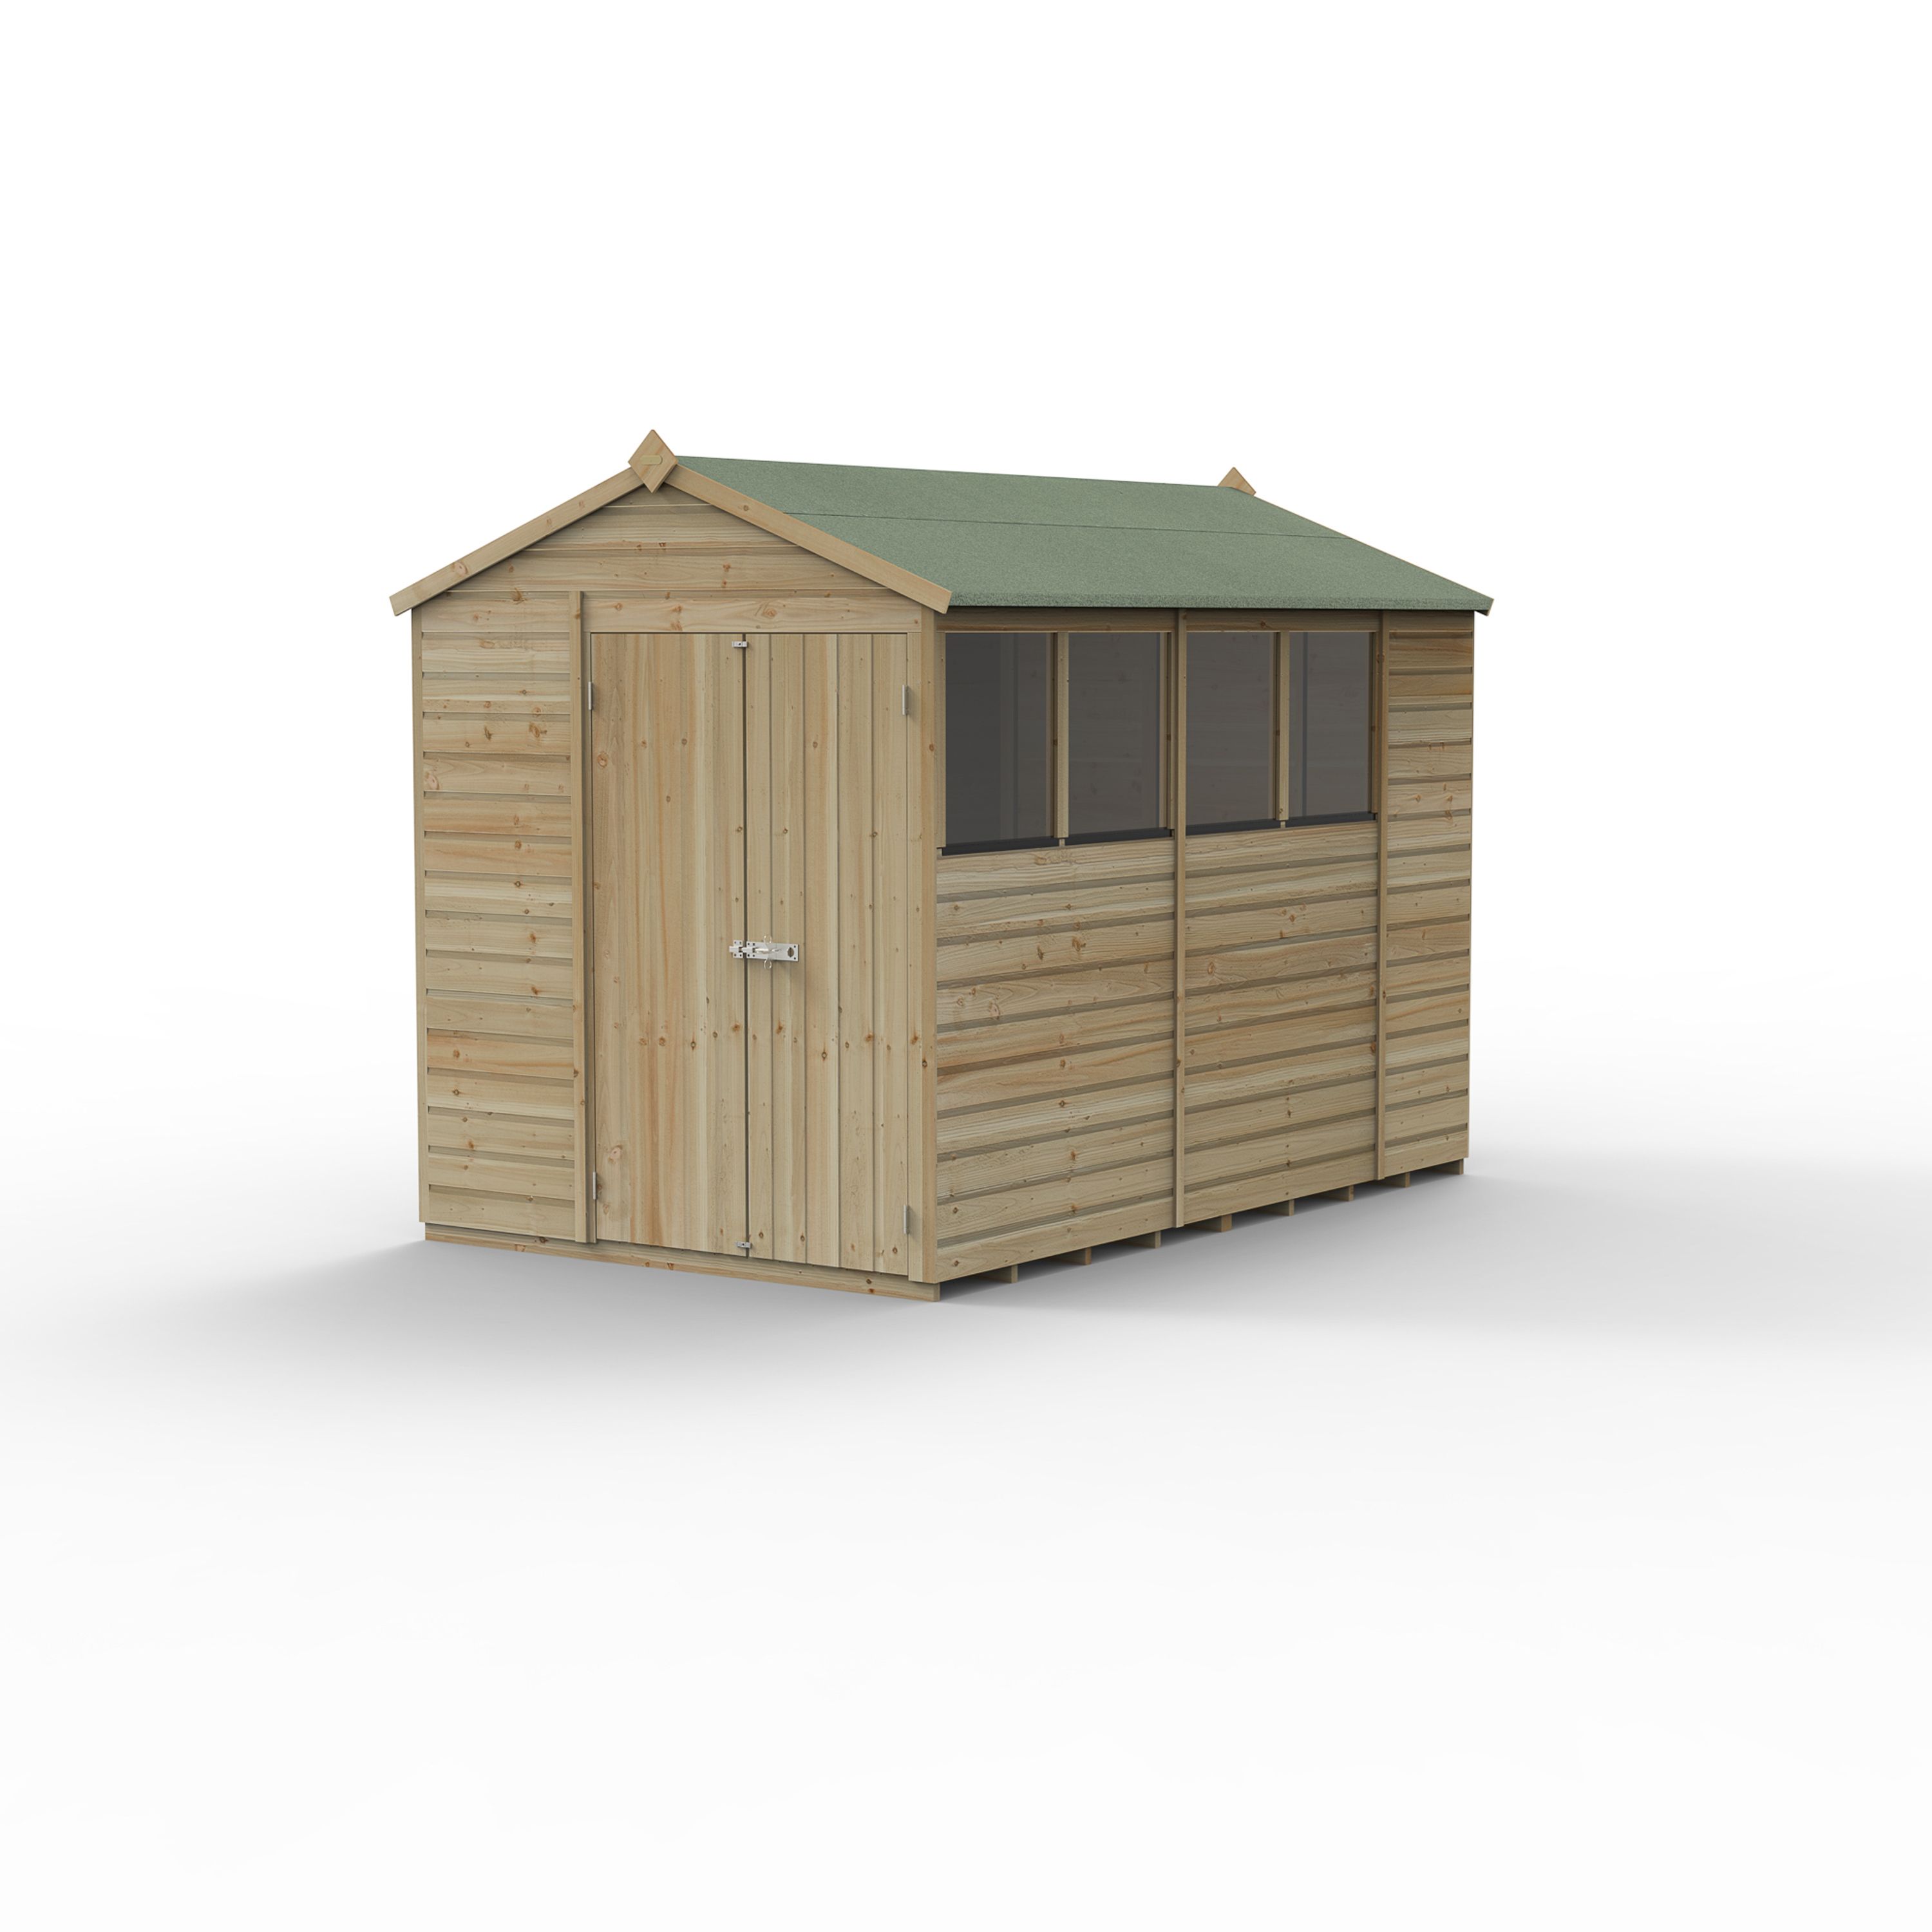 Forest Garden Beckwood 10x6 ft Apex Natural timber Wooden 2 door Shed with floor & 4 windows (Base included) - Assembly not required